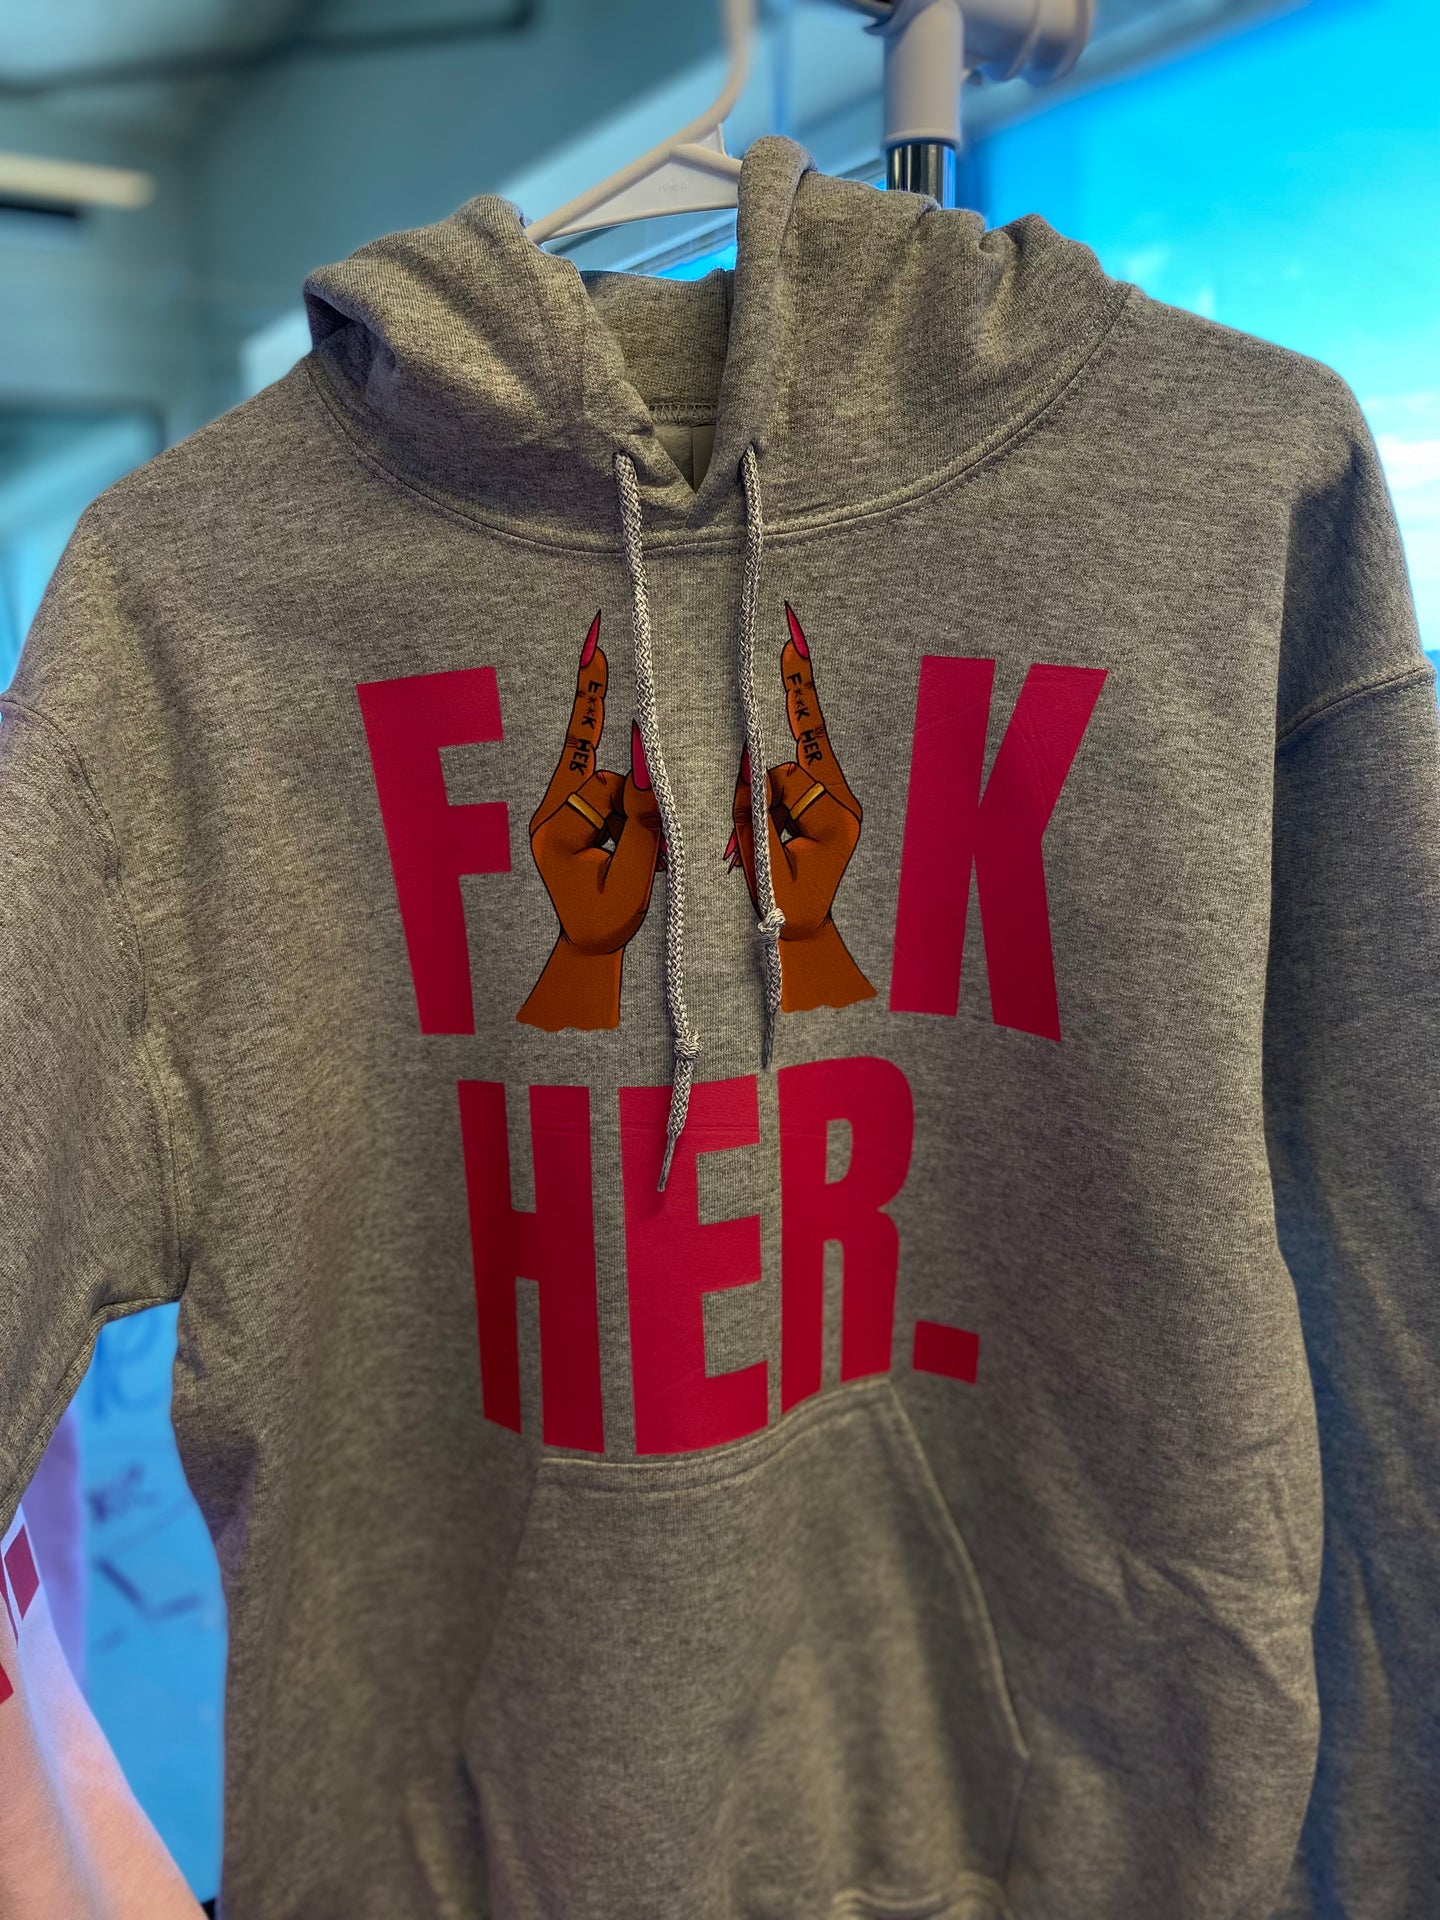 The Breakup Hoodie For HER.